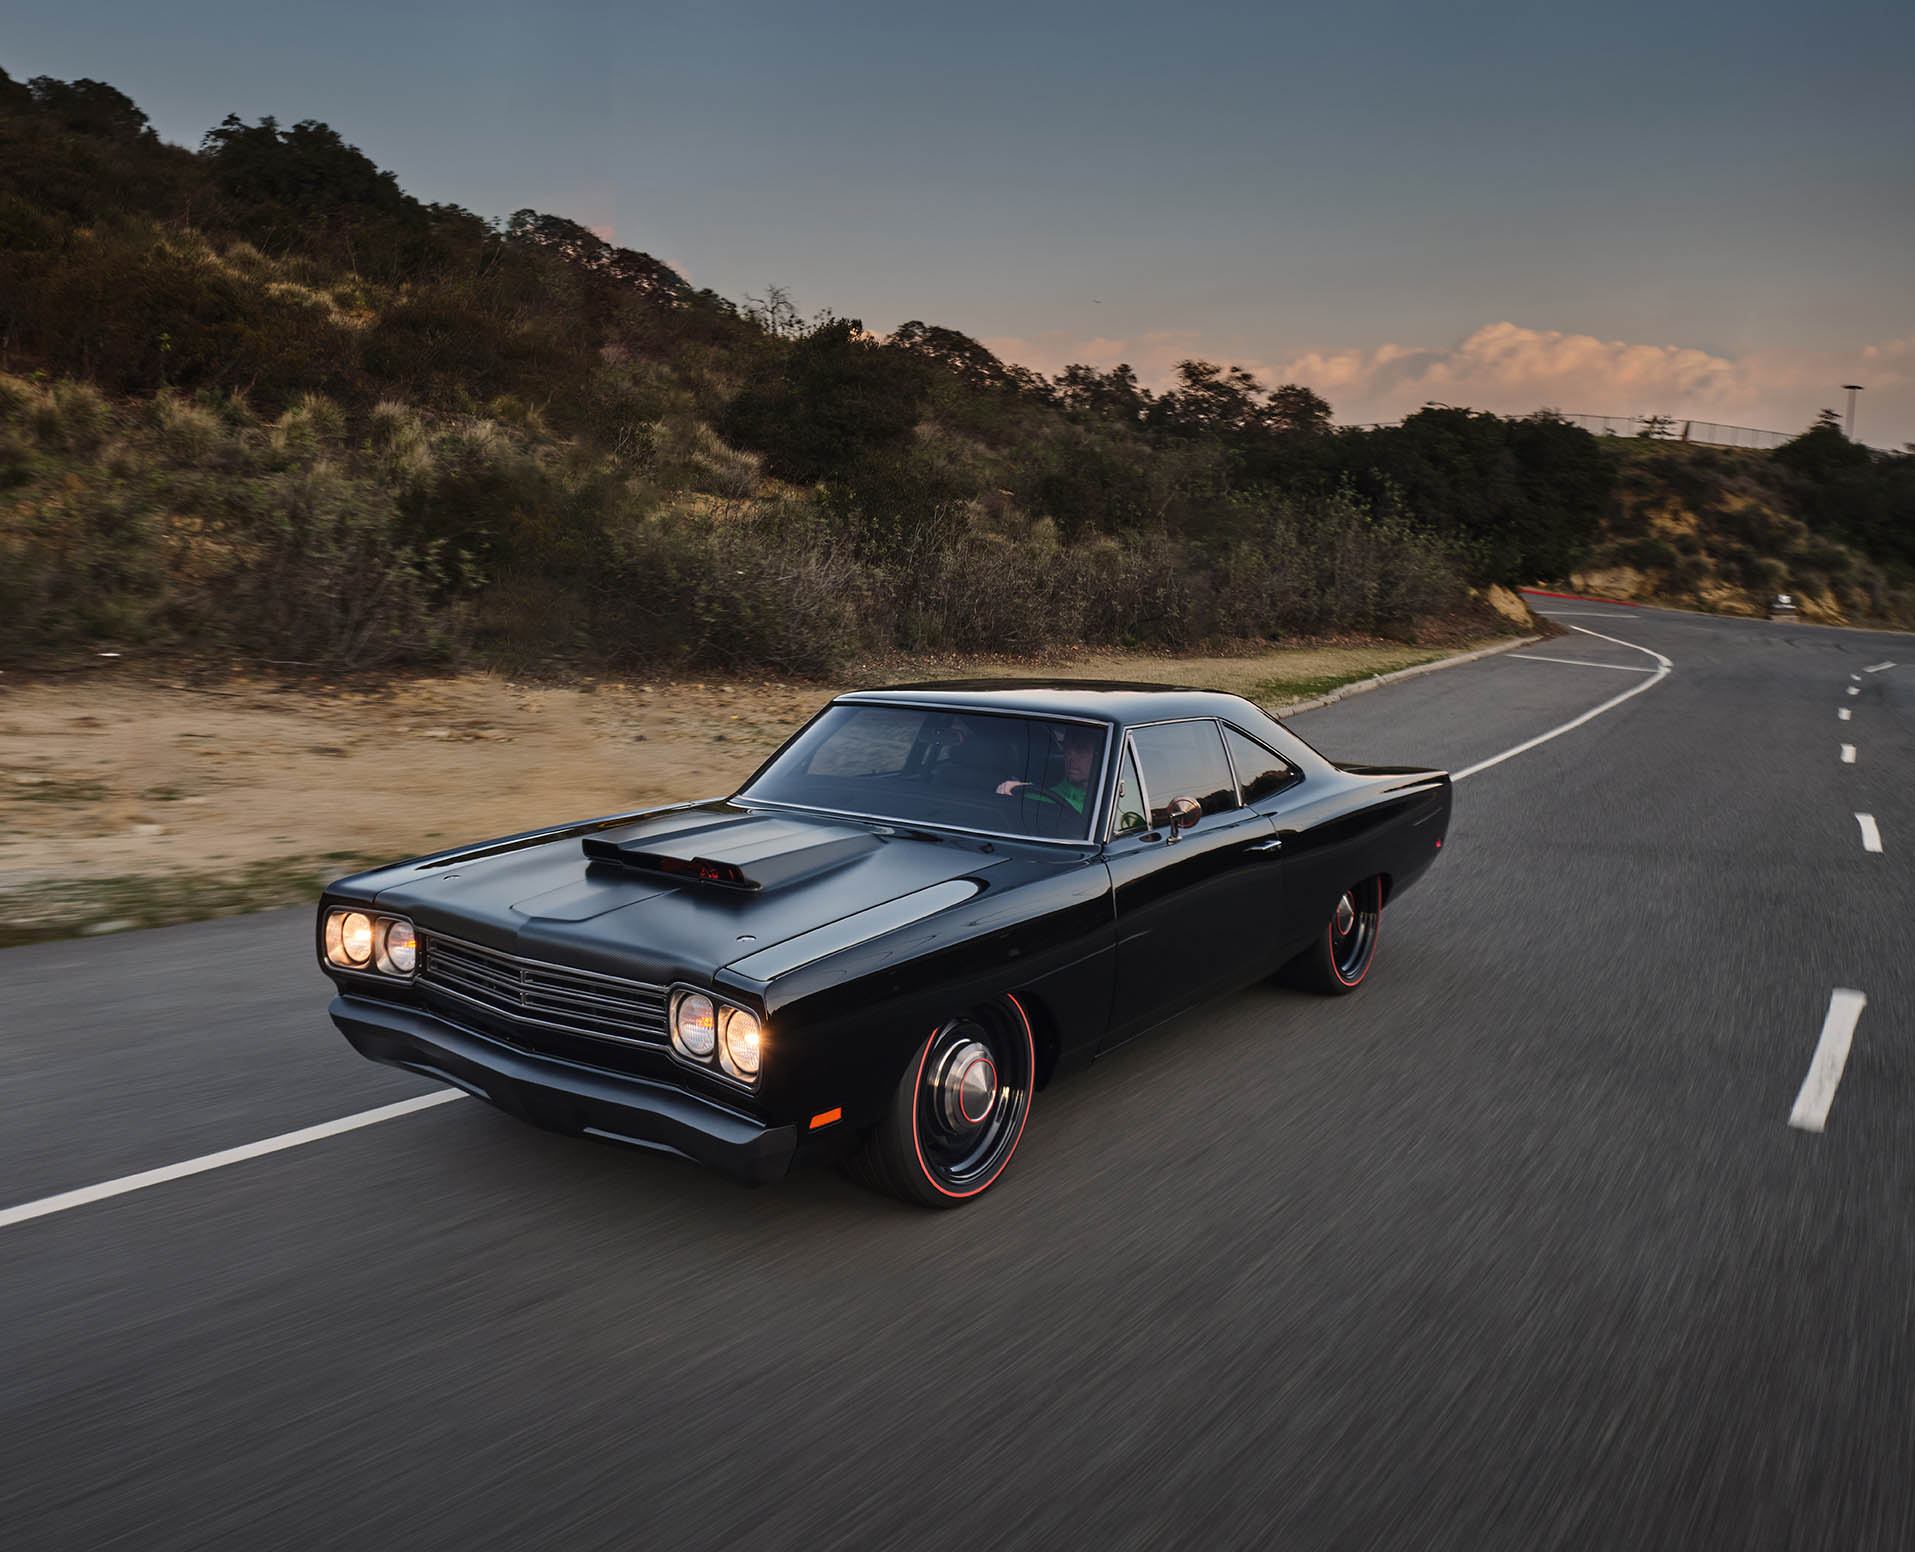 Kevin Hart’s  Plymouth Roadrunner by Salvaggio Design